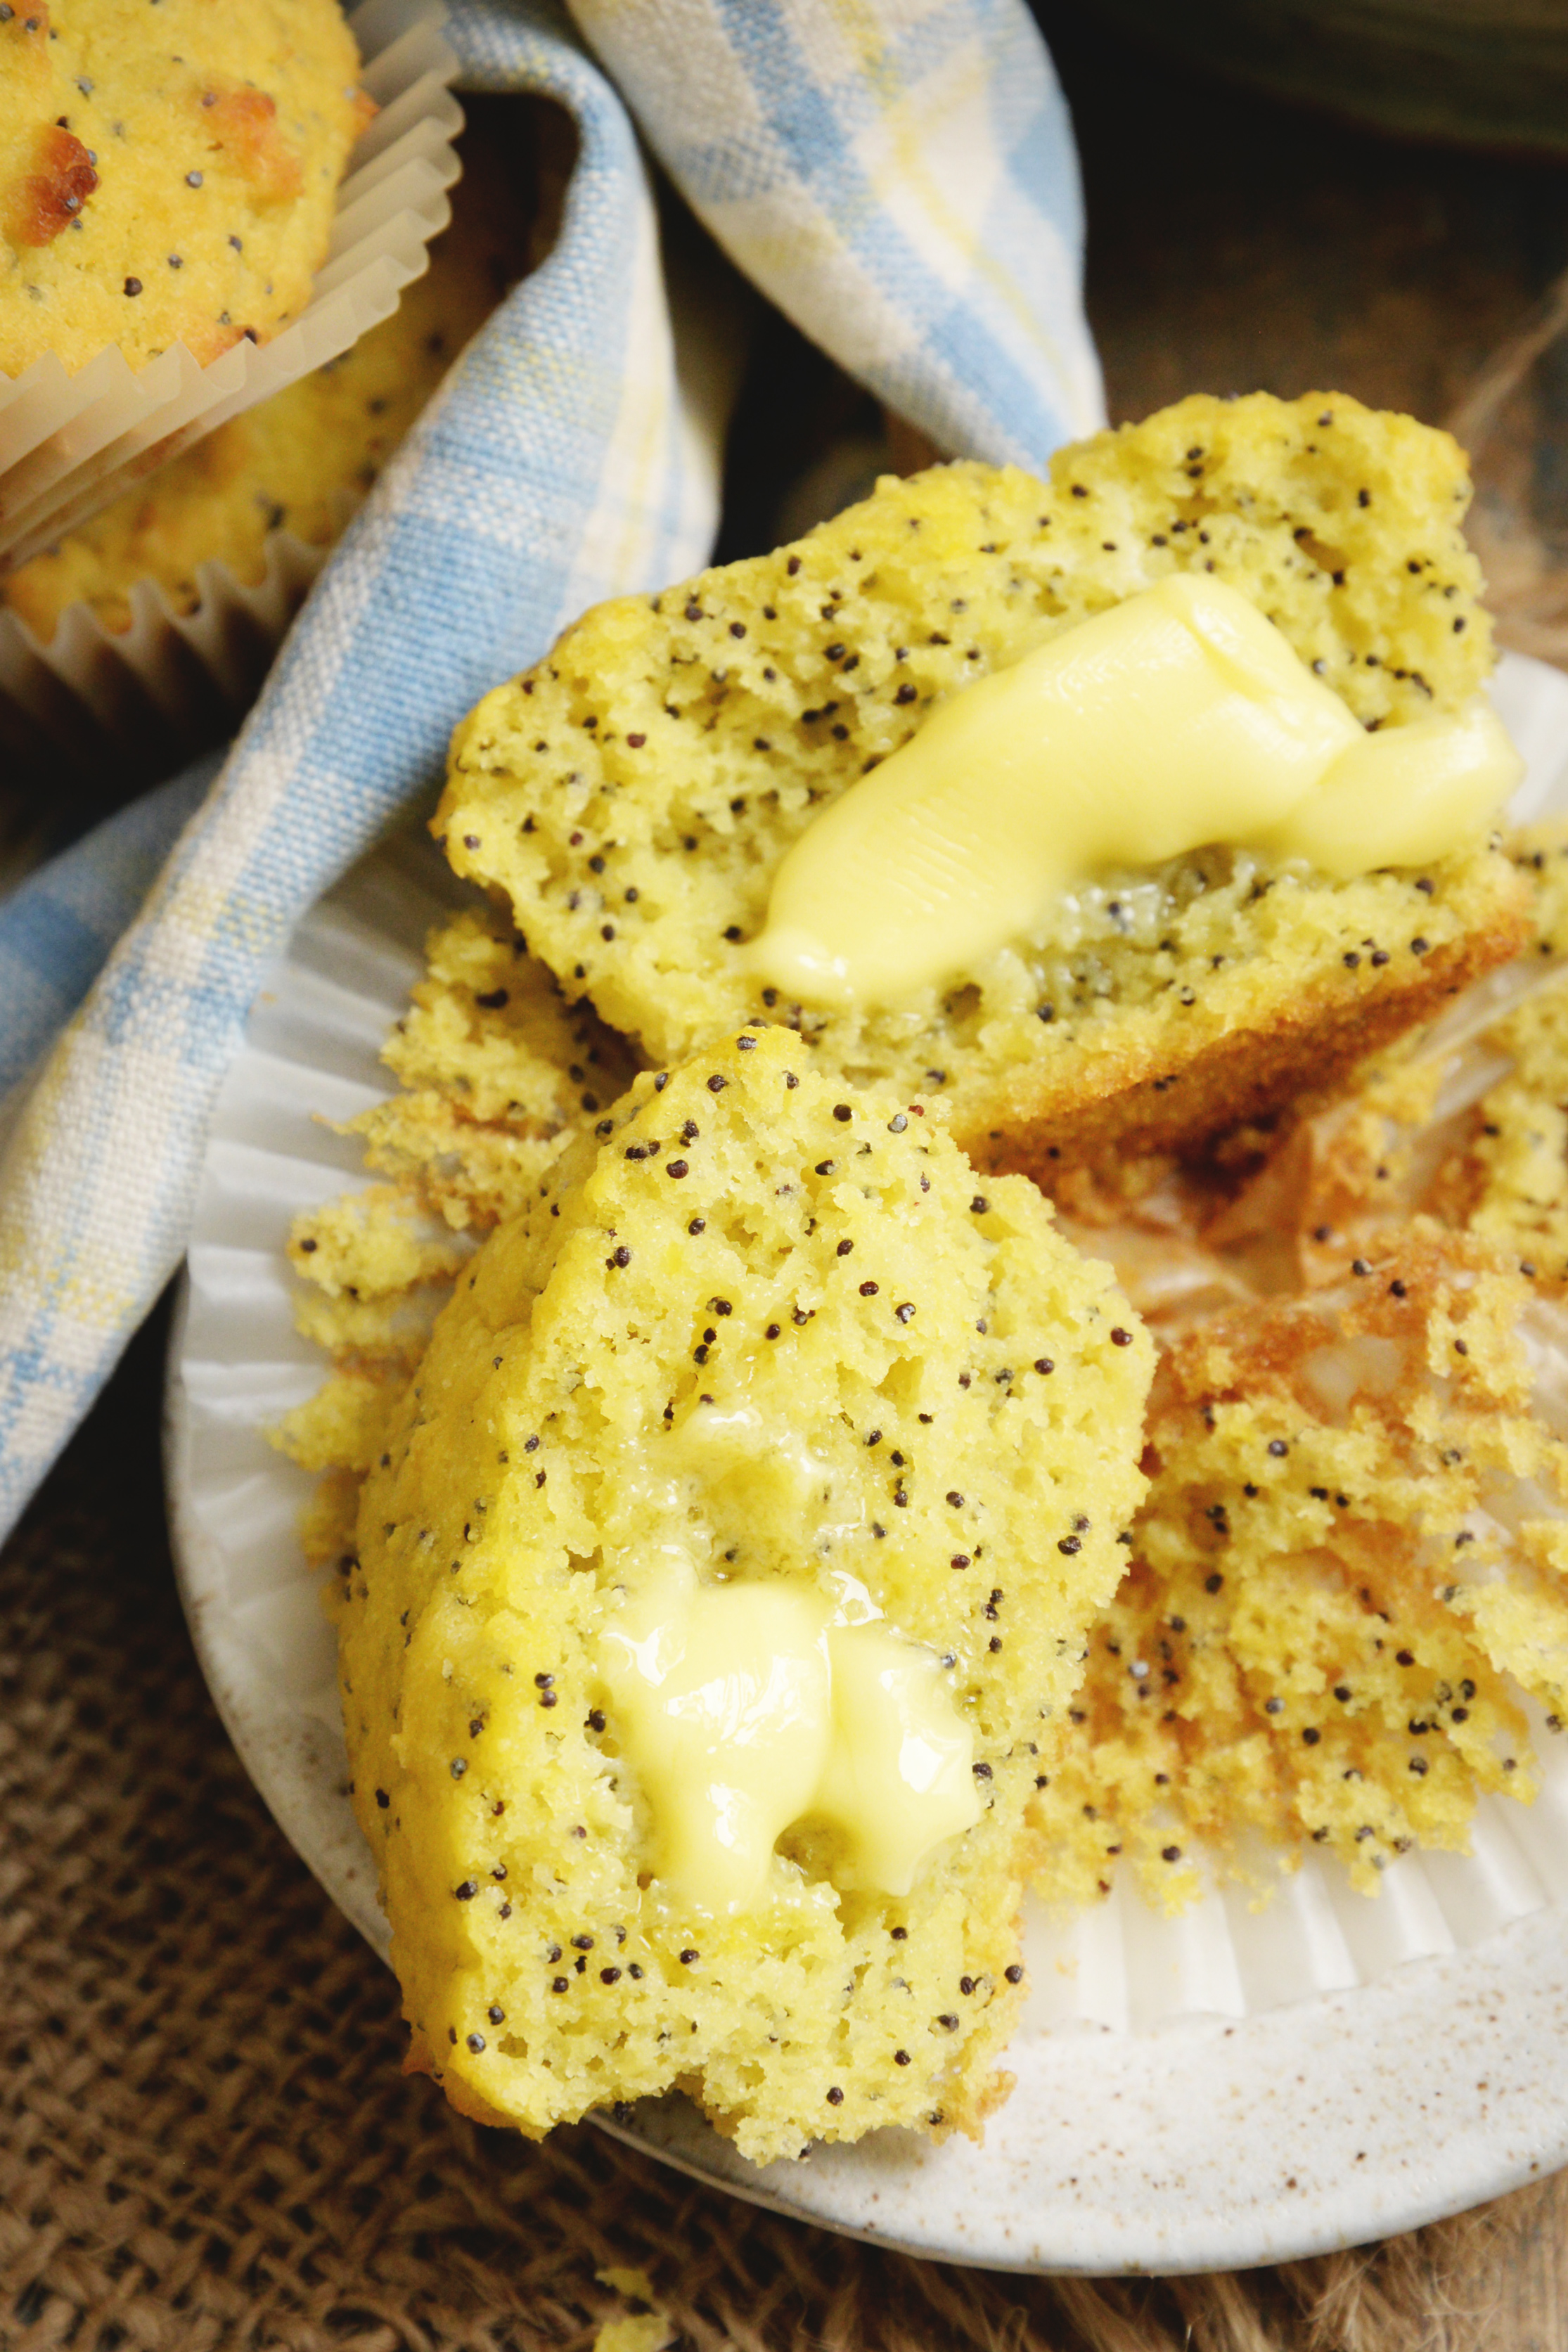 Lemon-Poppy-Seed-Muffins-Cloase-up of buttered muffin